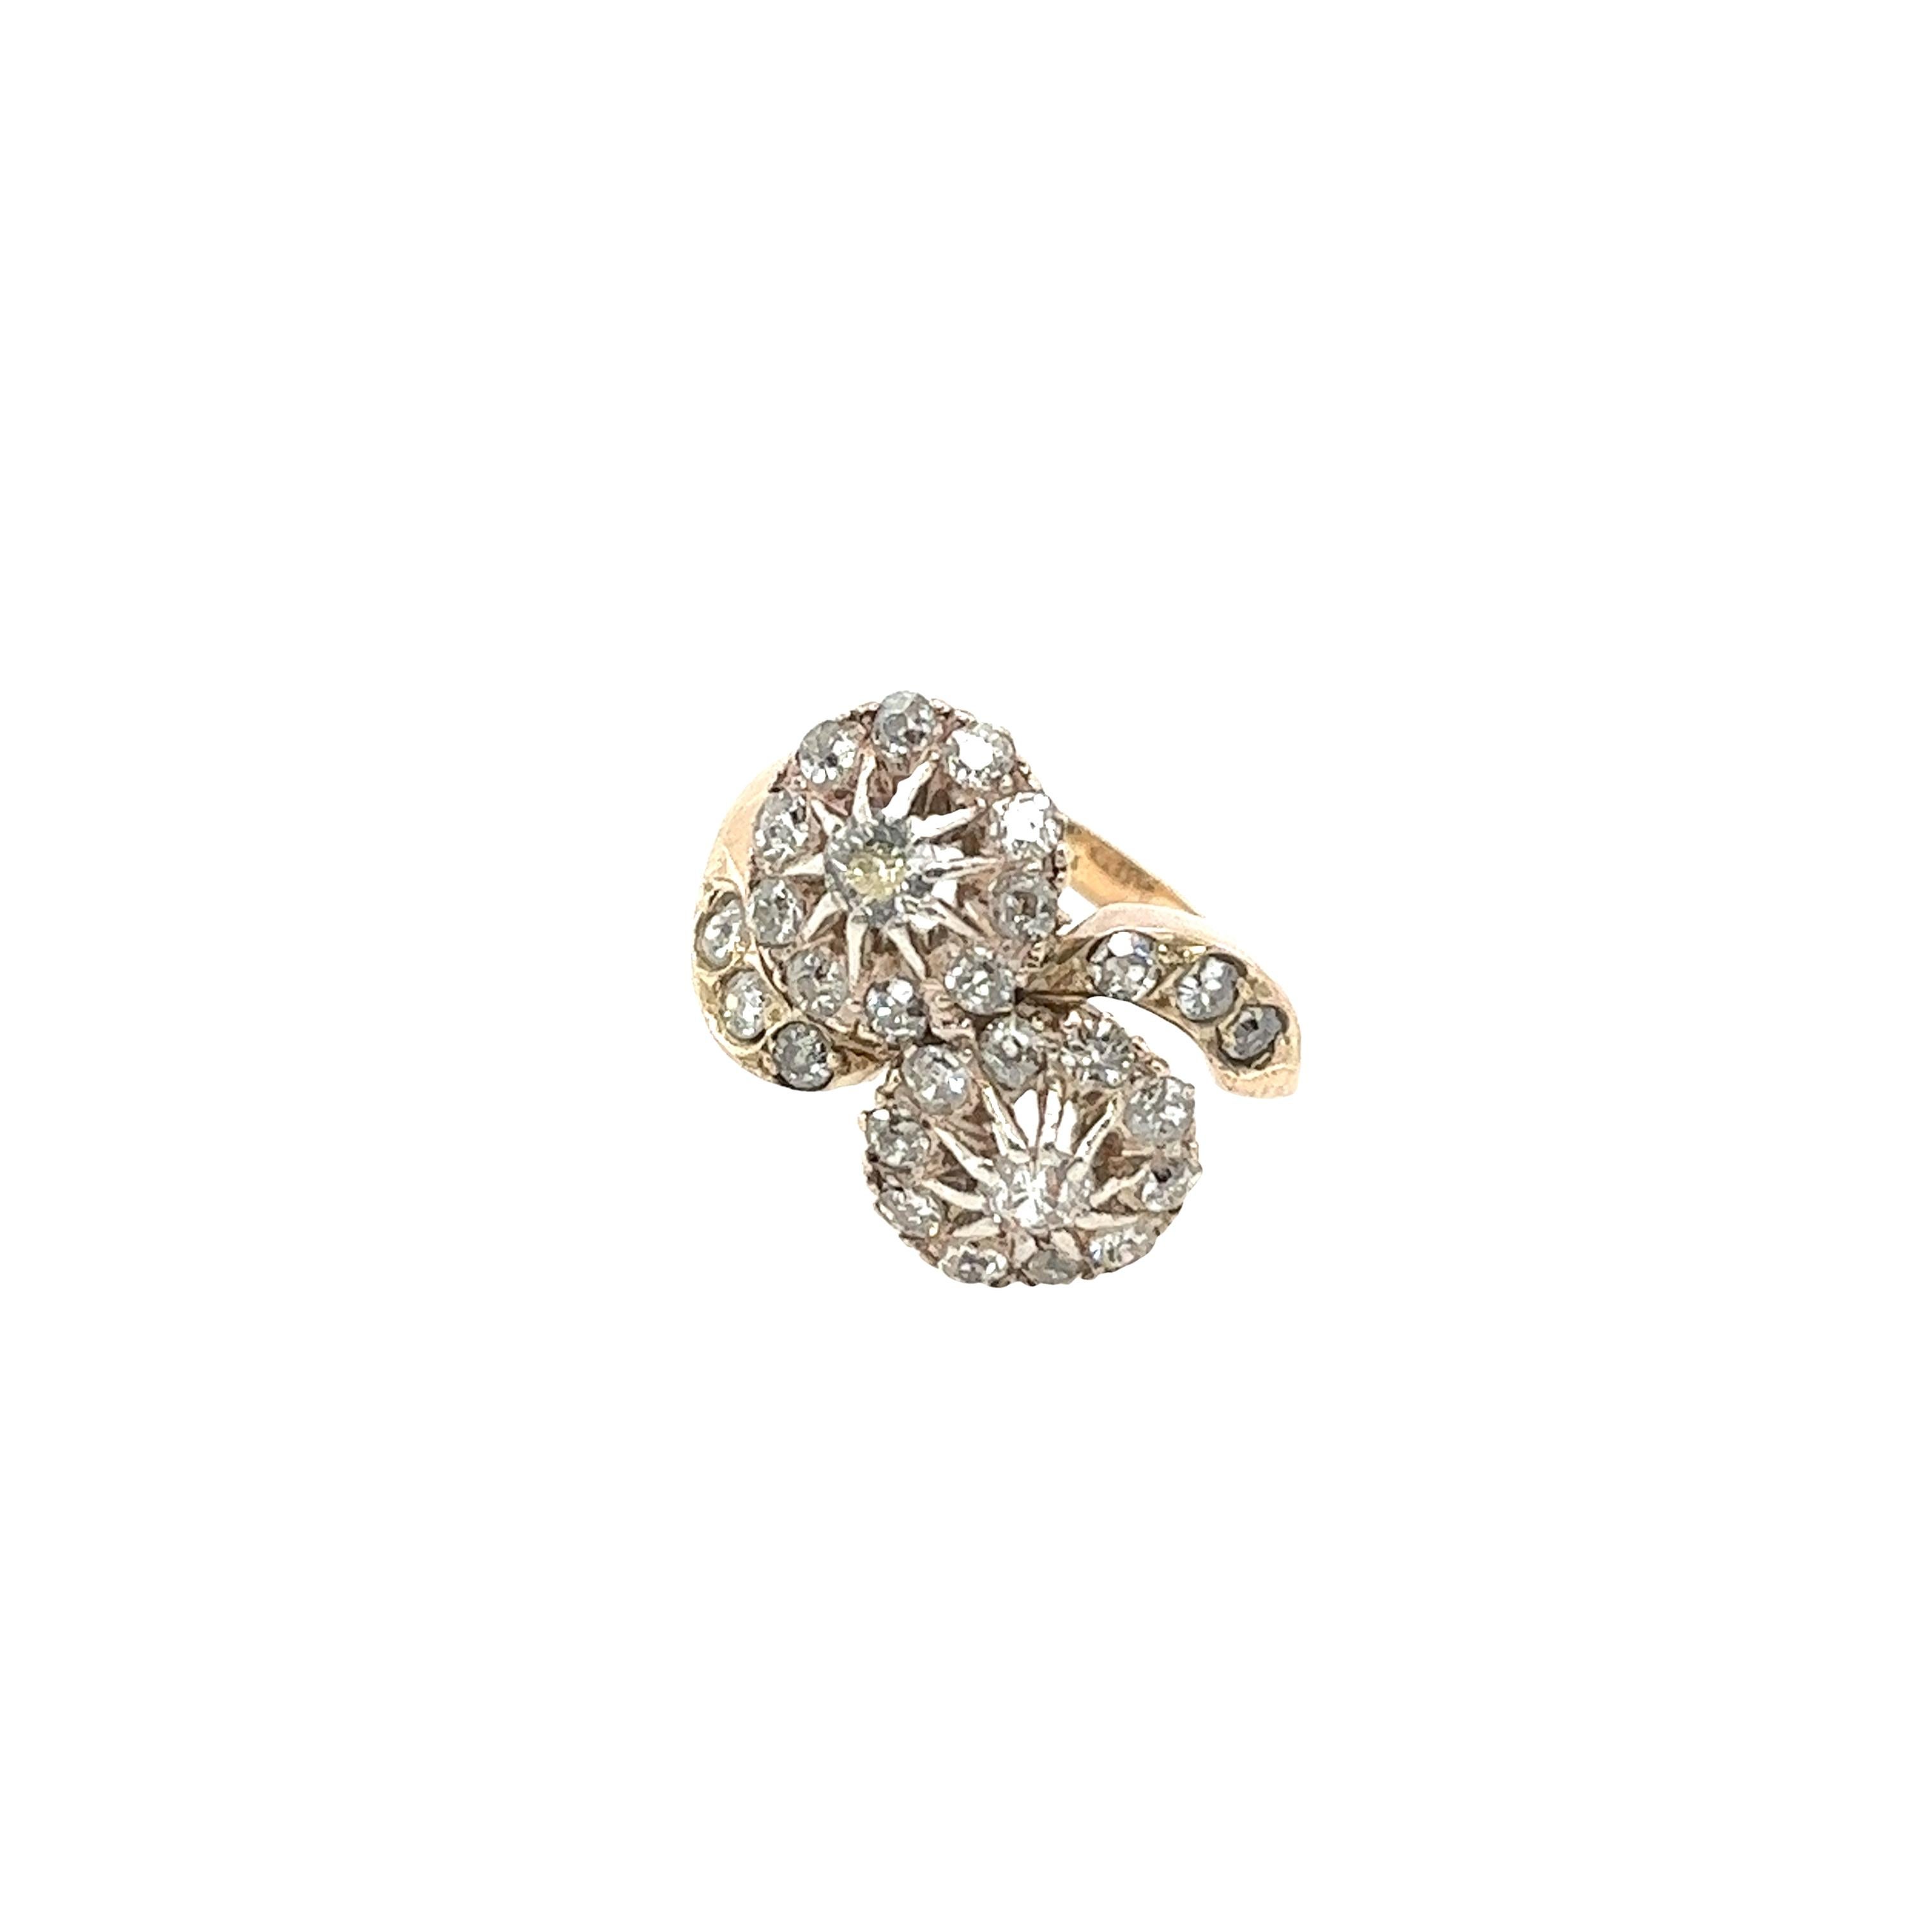 Vintage 14ct Yellow Gold Cluster Diamond Ring, Set With 0.70ct Old Cut Diamonds For Sale 1